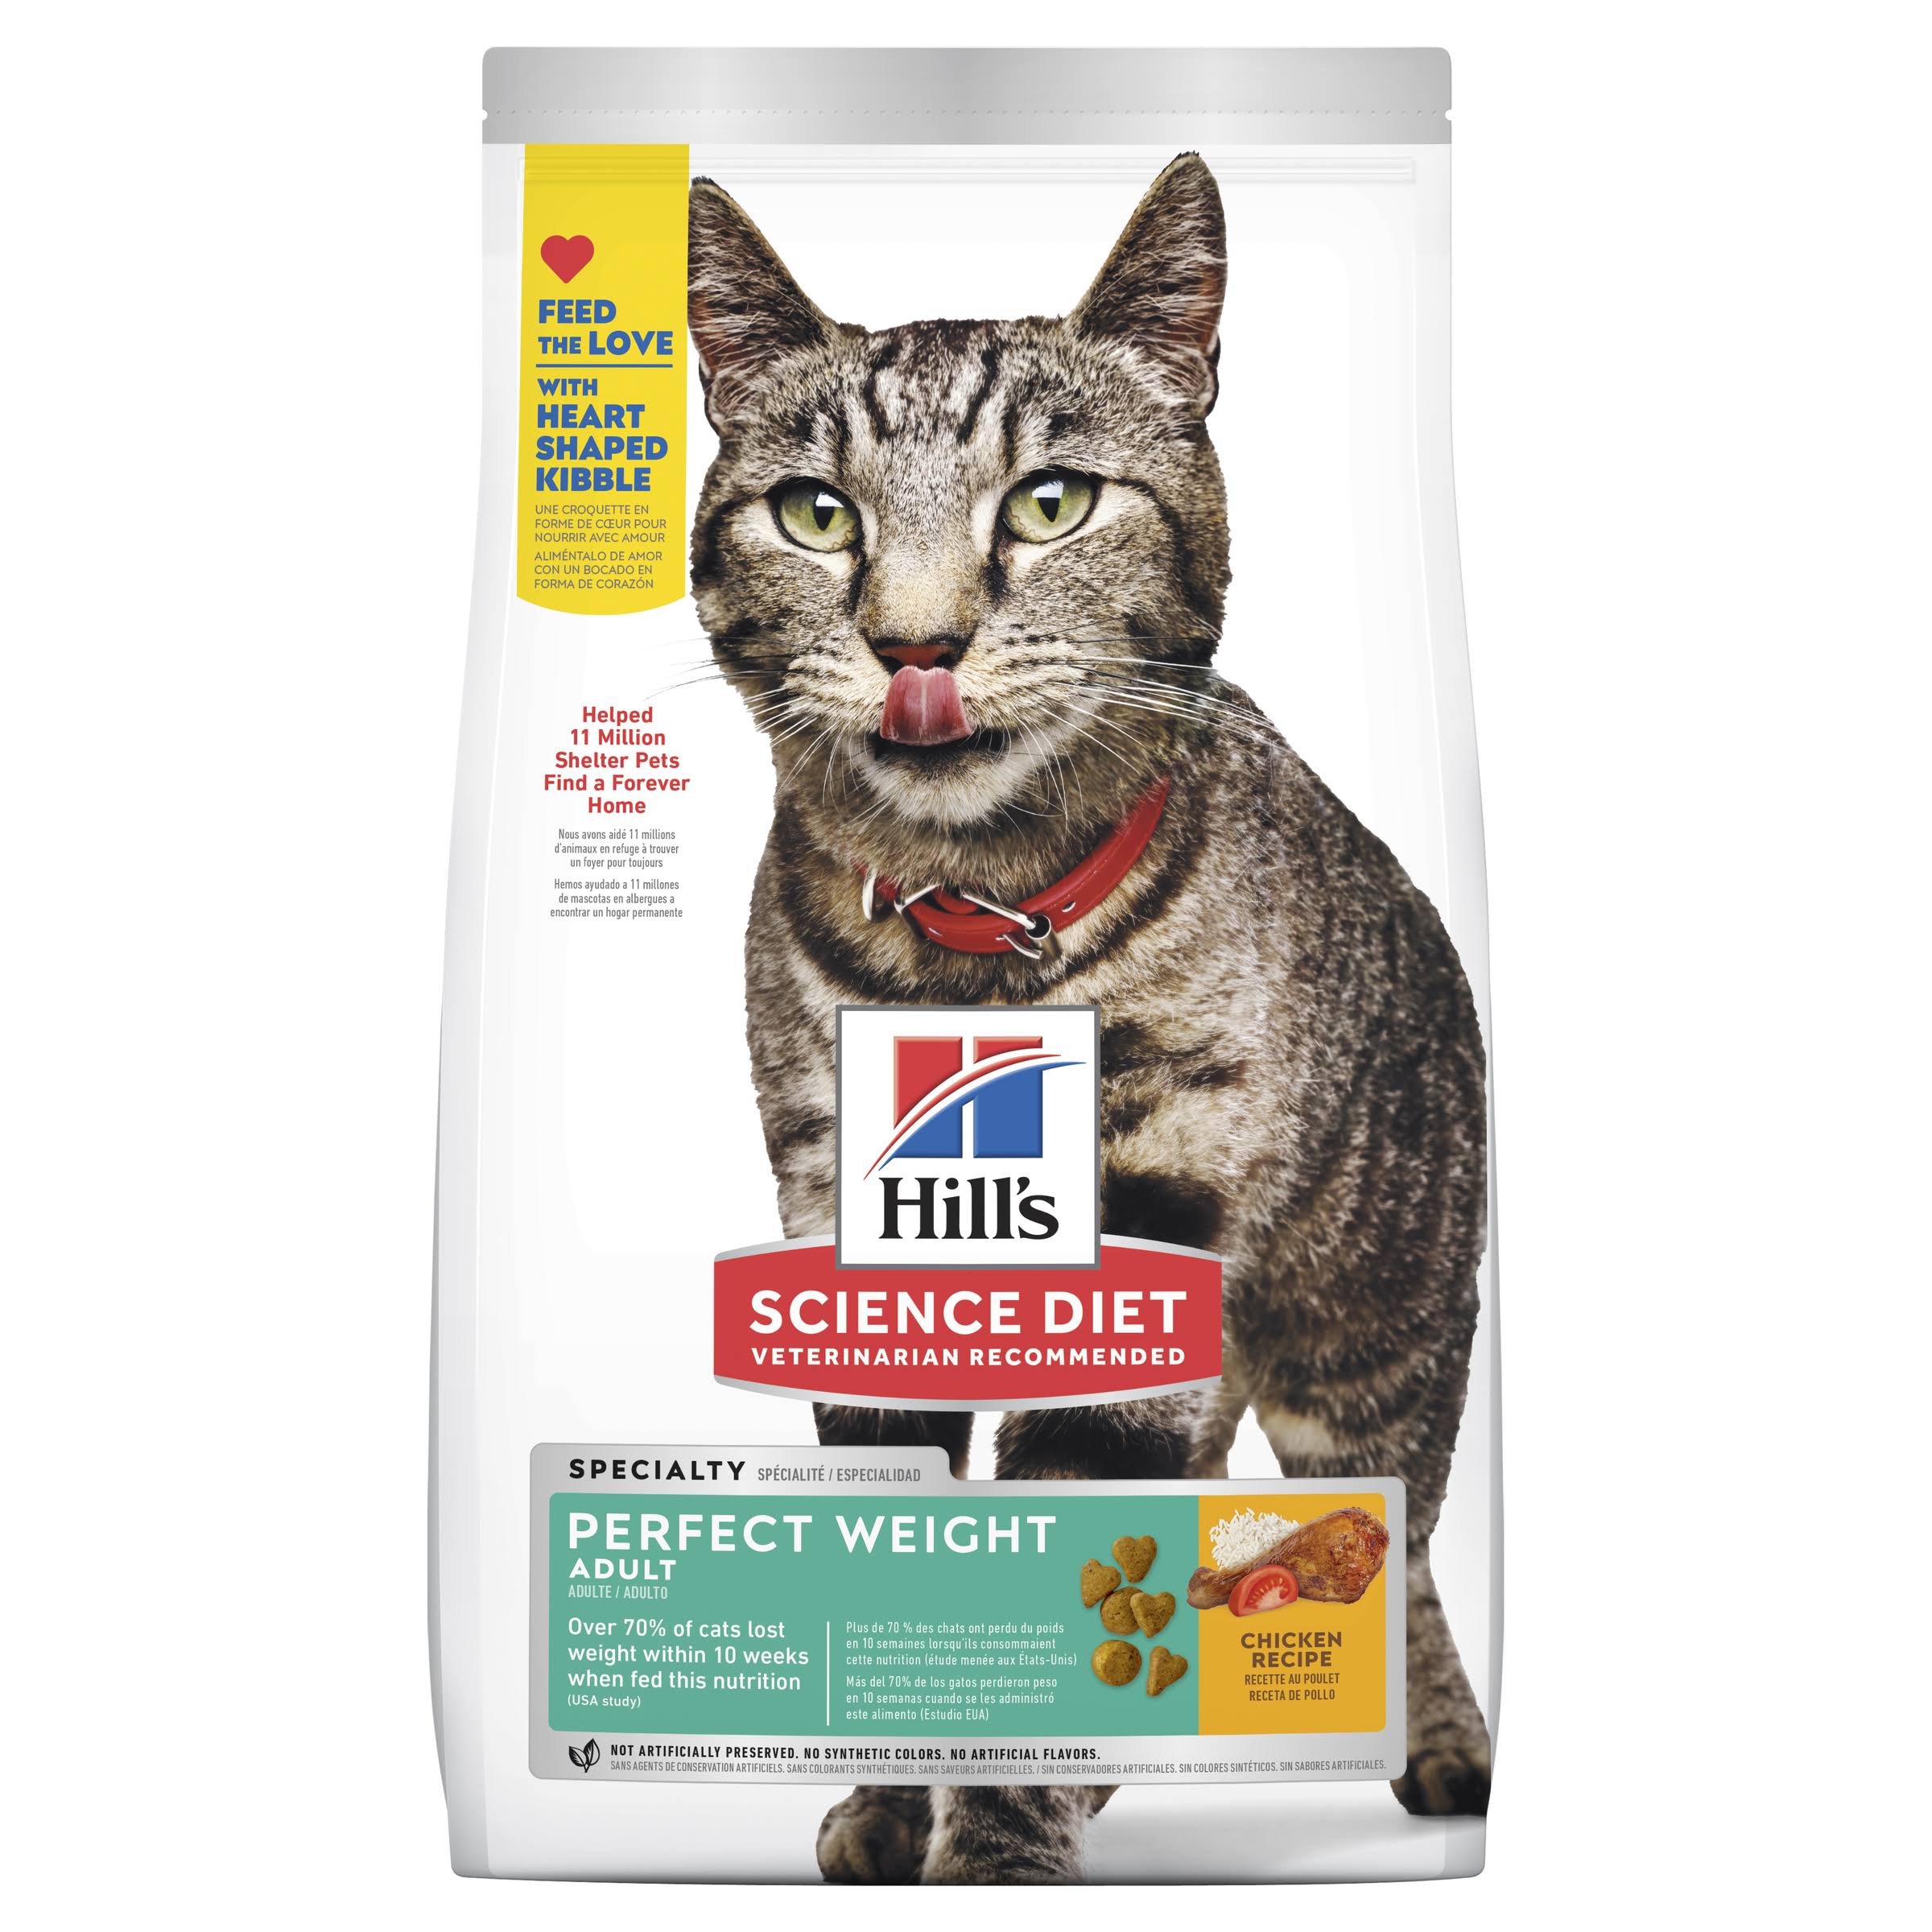 Hill's Science Diet Perfect Weight Premium Natural Cat Food Adult - Chicken Recipe, 15lbs